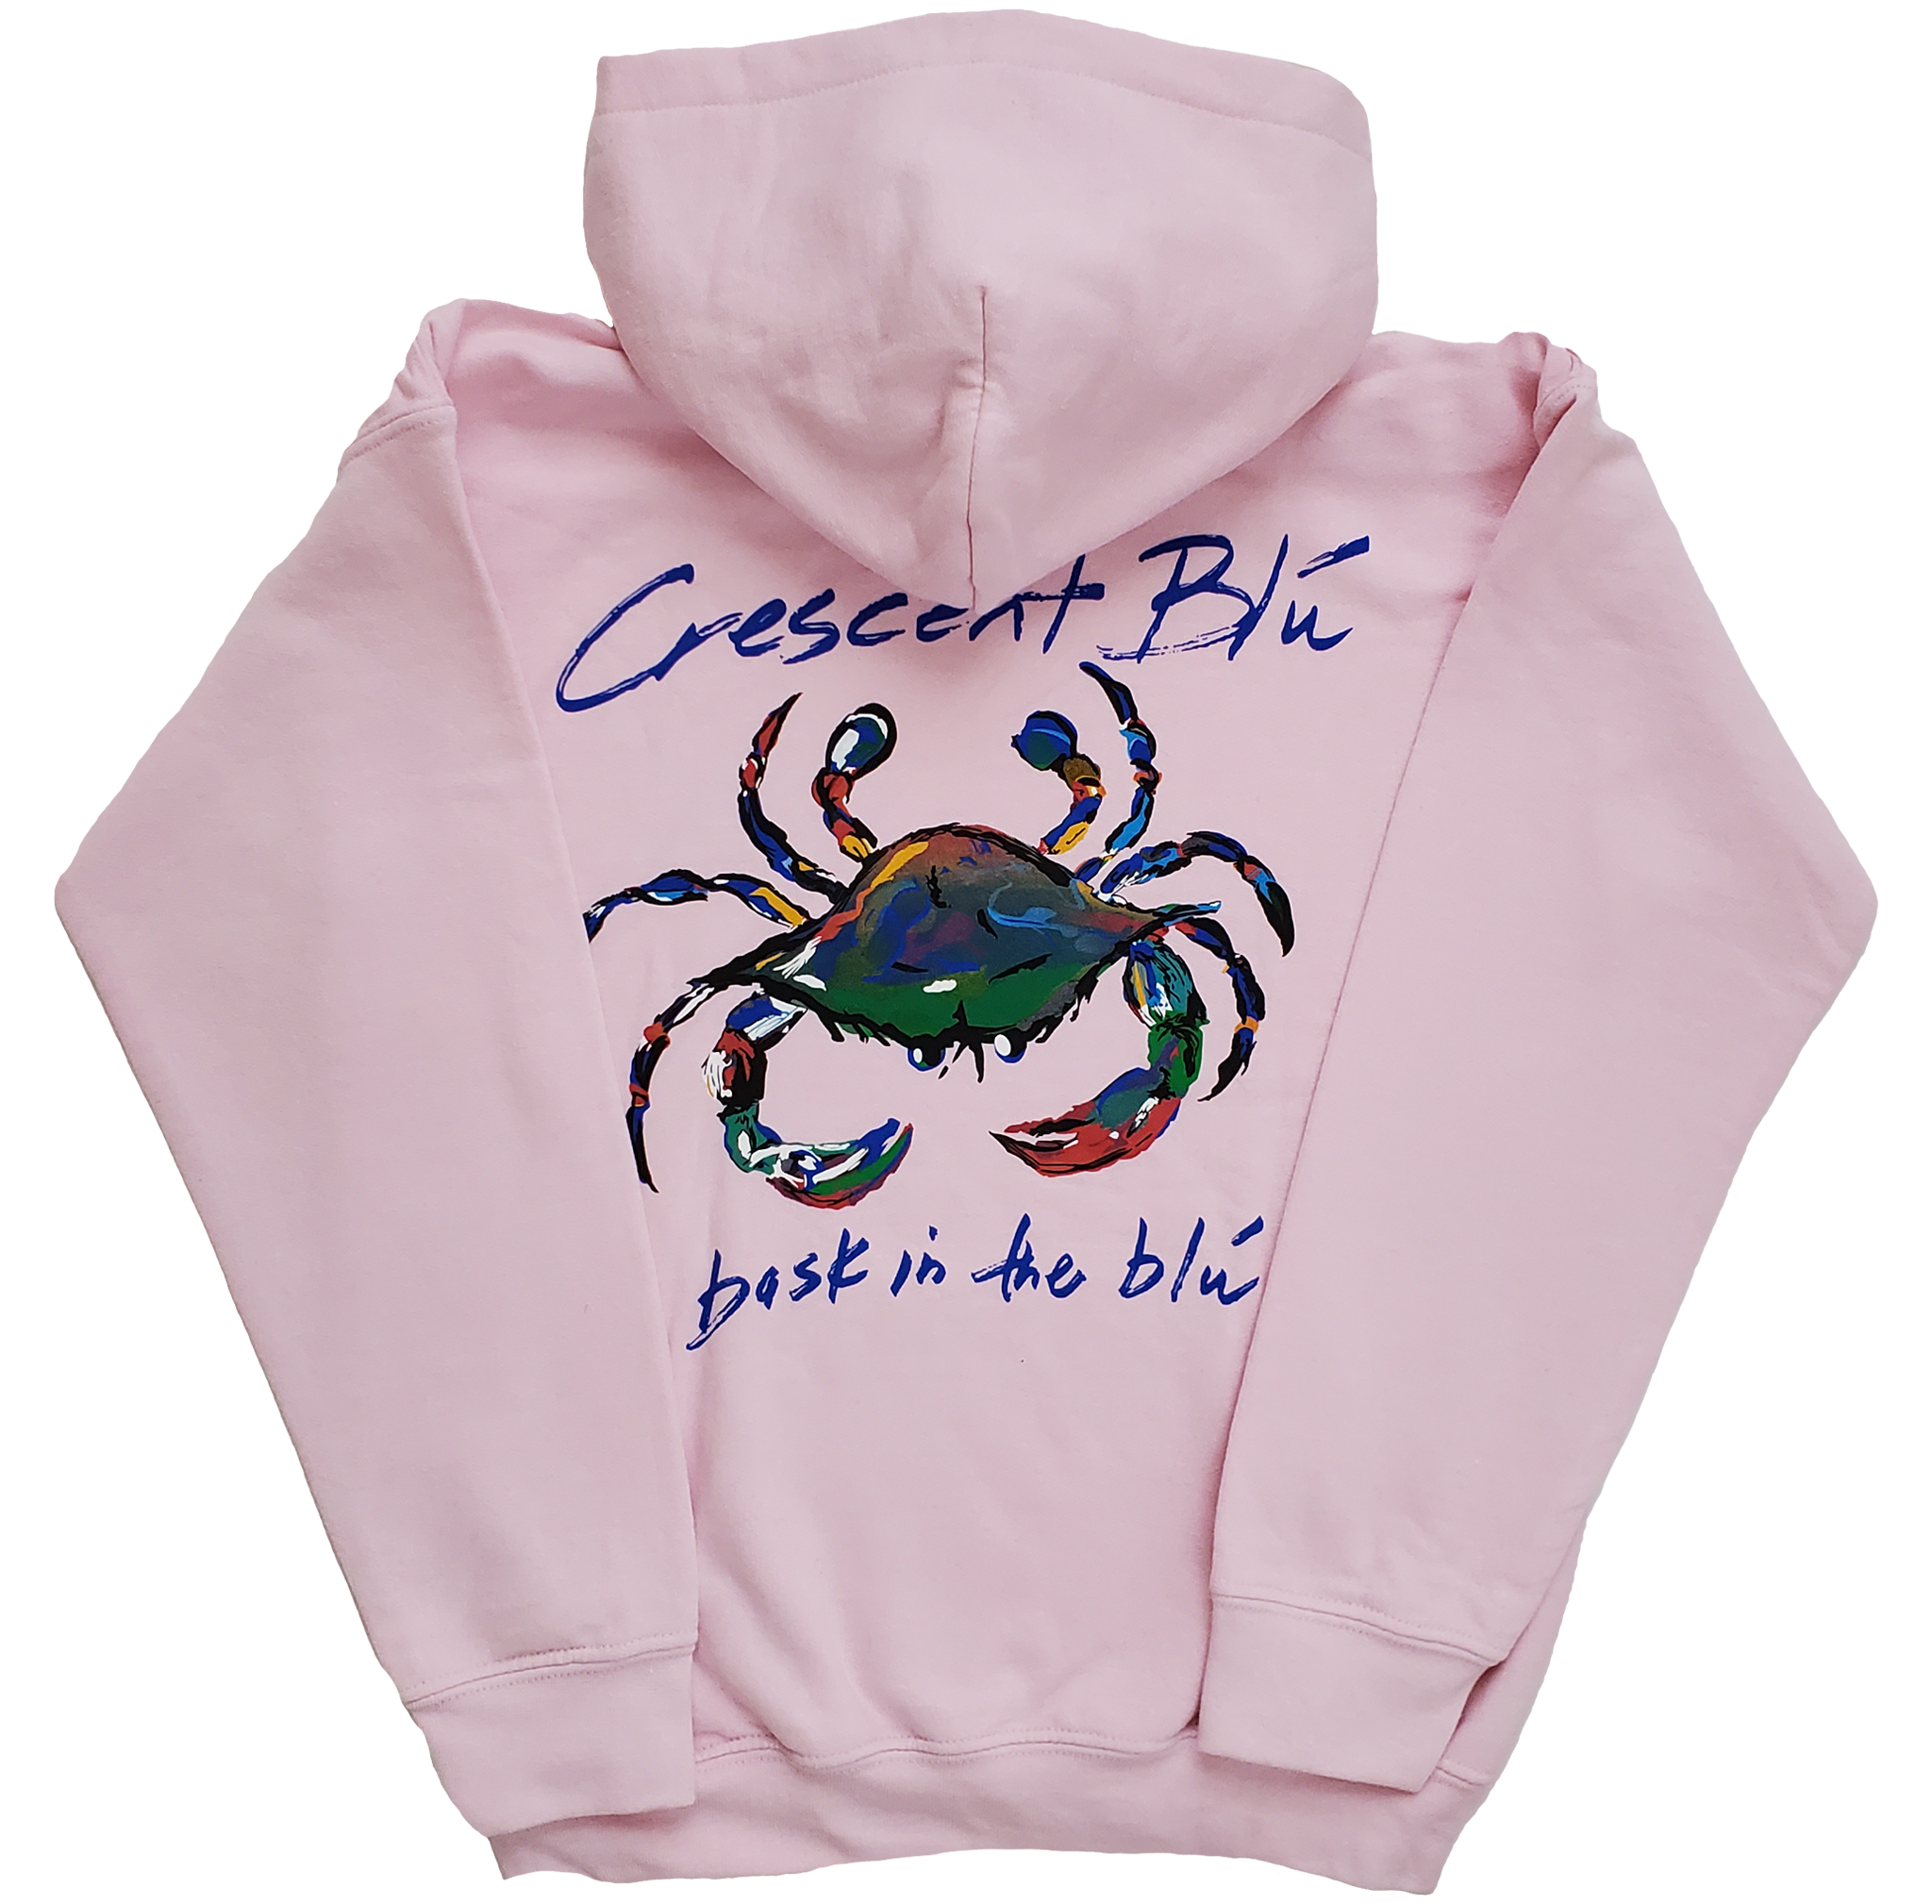 Light pink kids sweatshirt with hood. ribbed cuff and hem, Crescent Blu's colorful blue crab logo centered on the back.